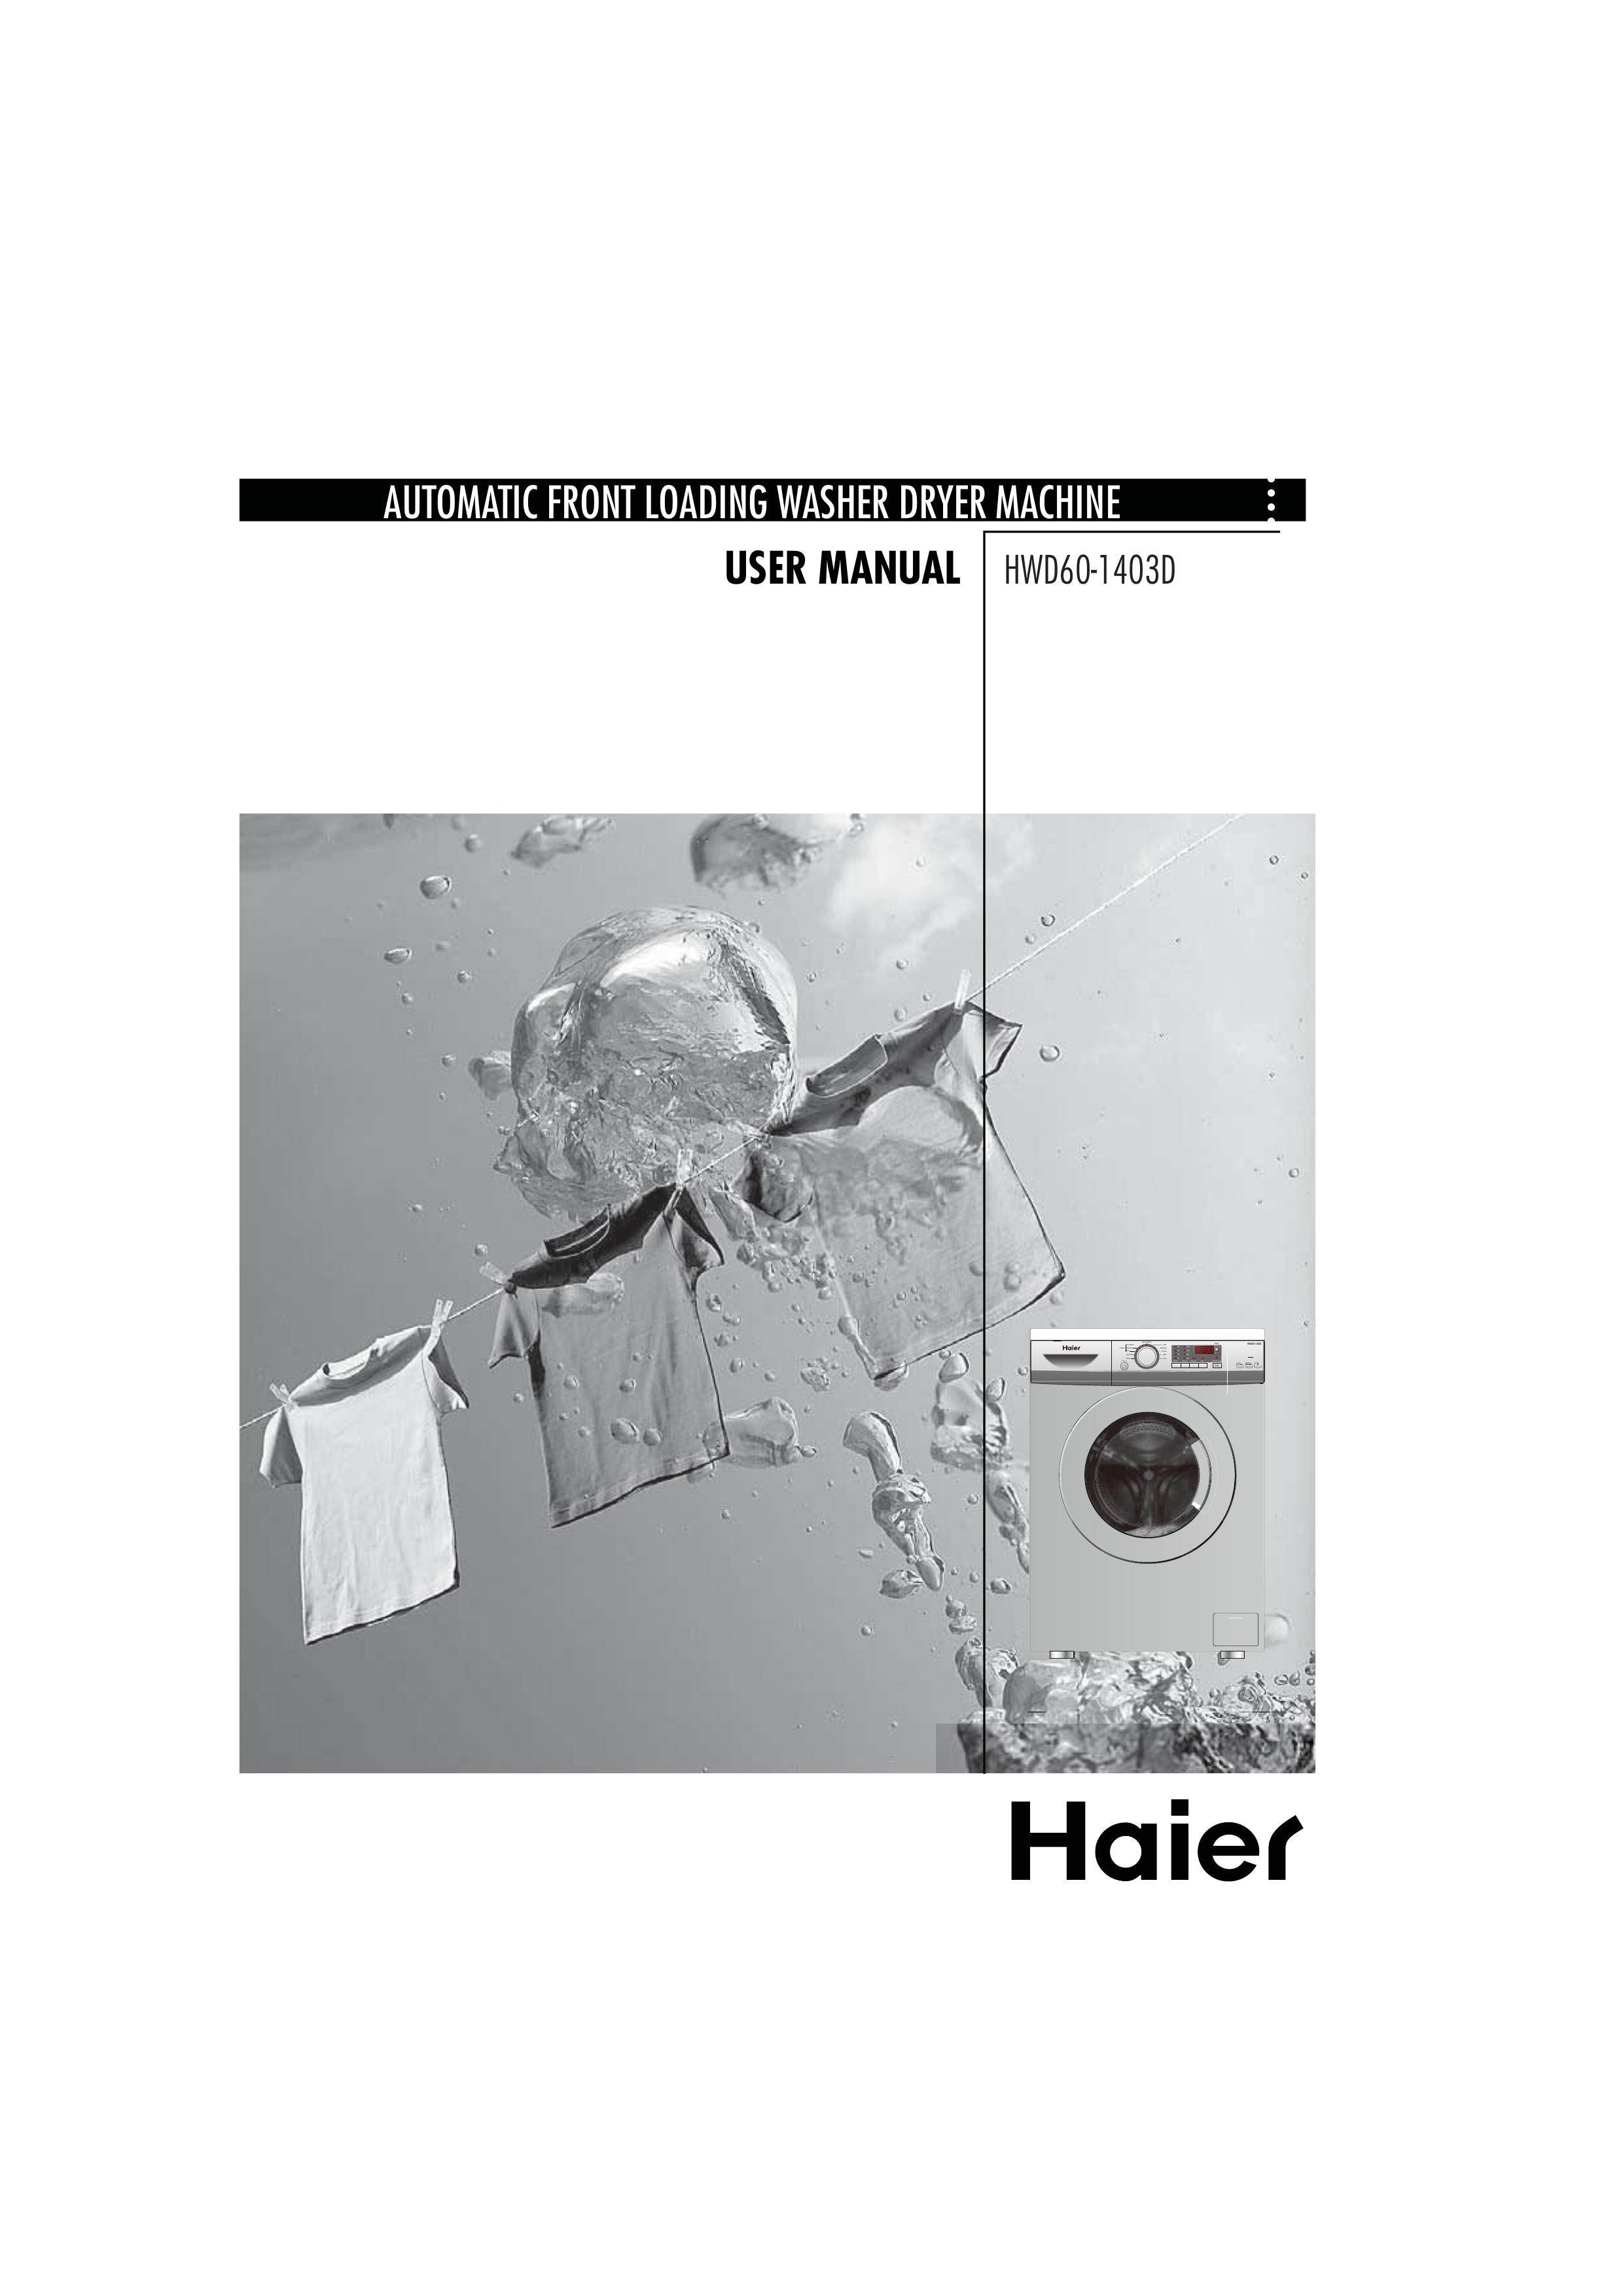 Haier HWD60-1403D Washer/Dryer User Manual